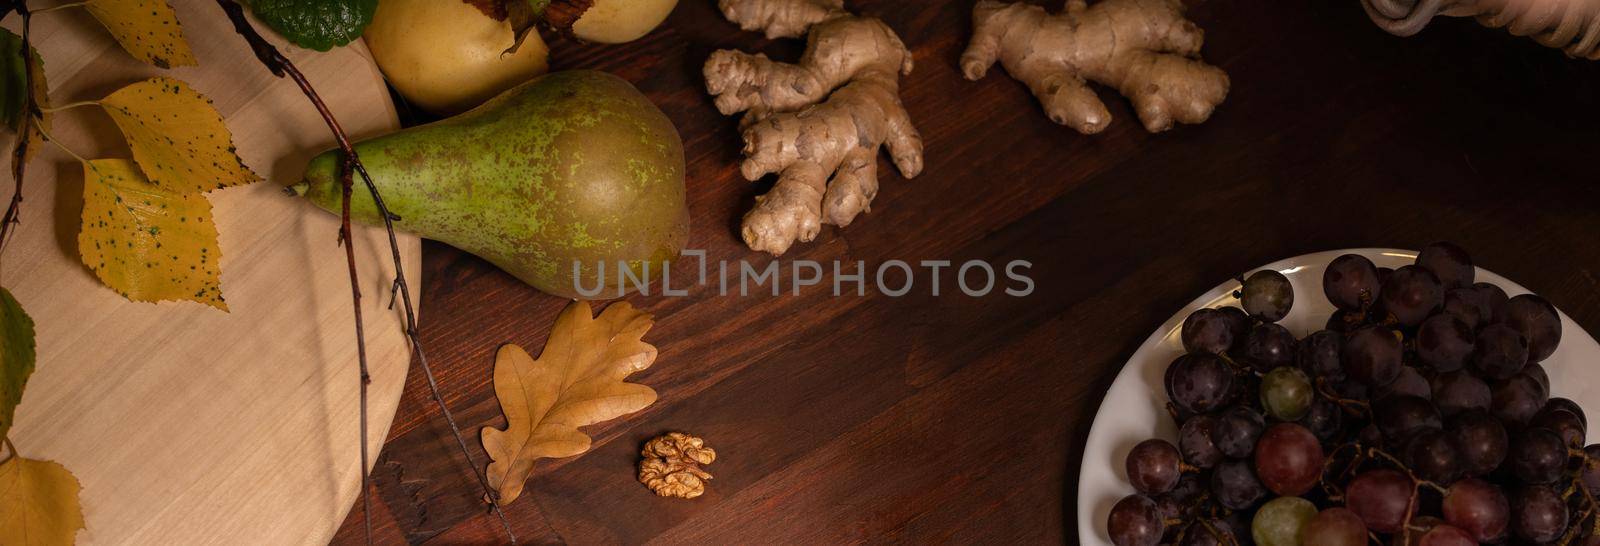 Panoramic banner. Close up top view of a fruits, grapes, ginger root on a wooden table. Wine snacks set: selection of cheese, grapes, pear and walnuts on a wooden board by LipikStockMedia